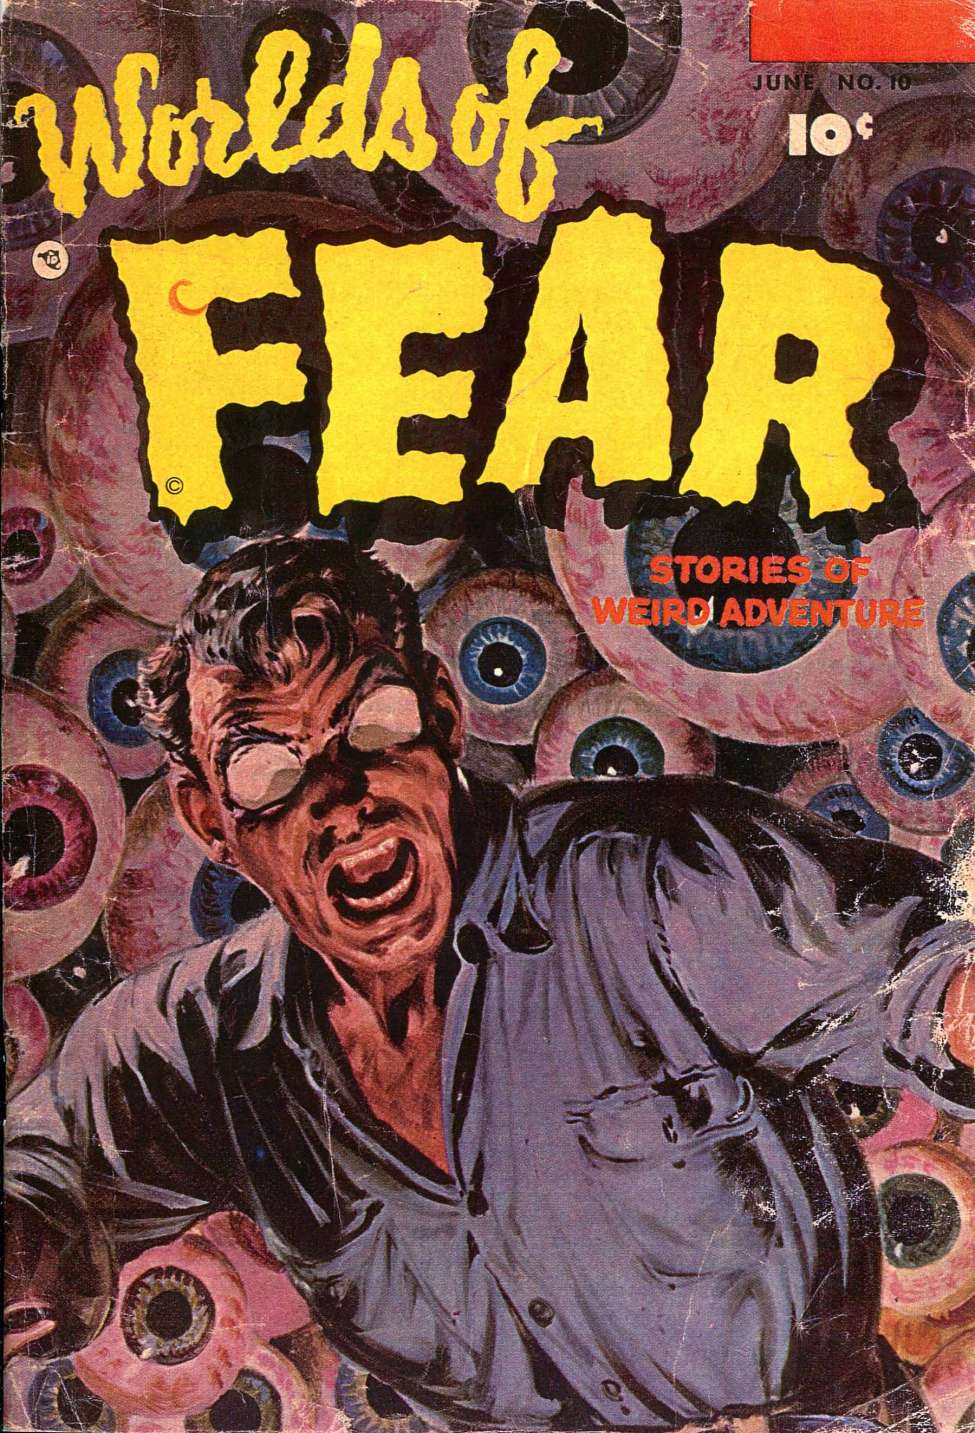 Comic Book Cover For Worlds of Fear 10